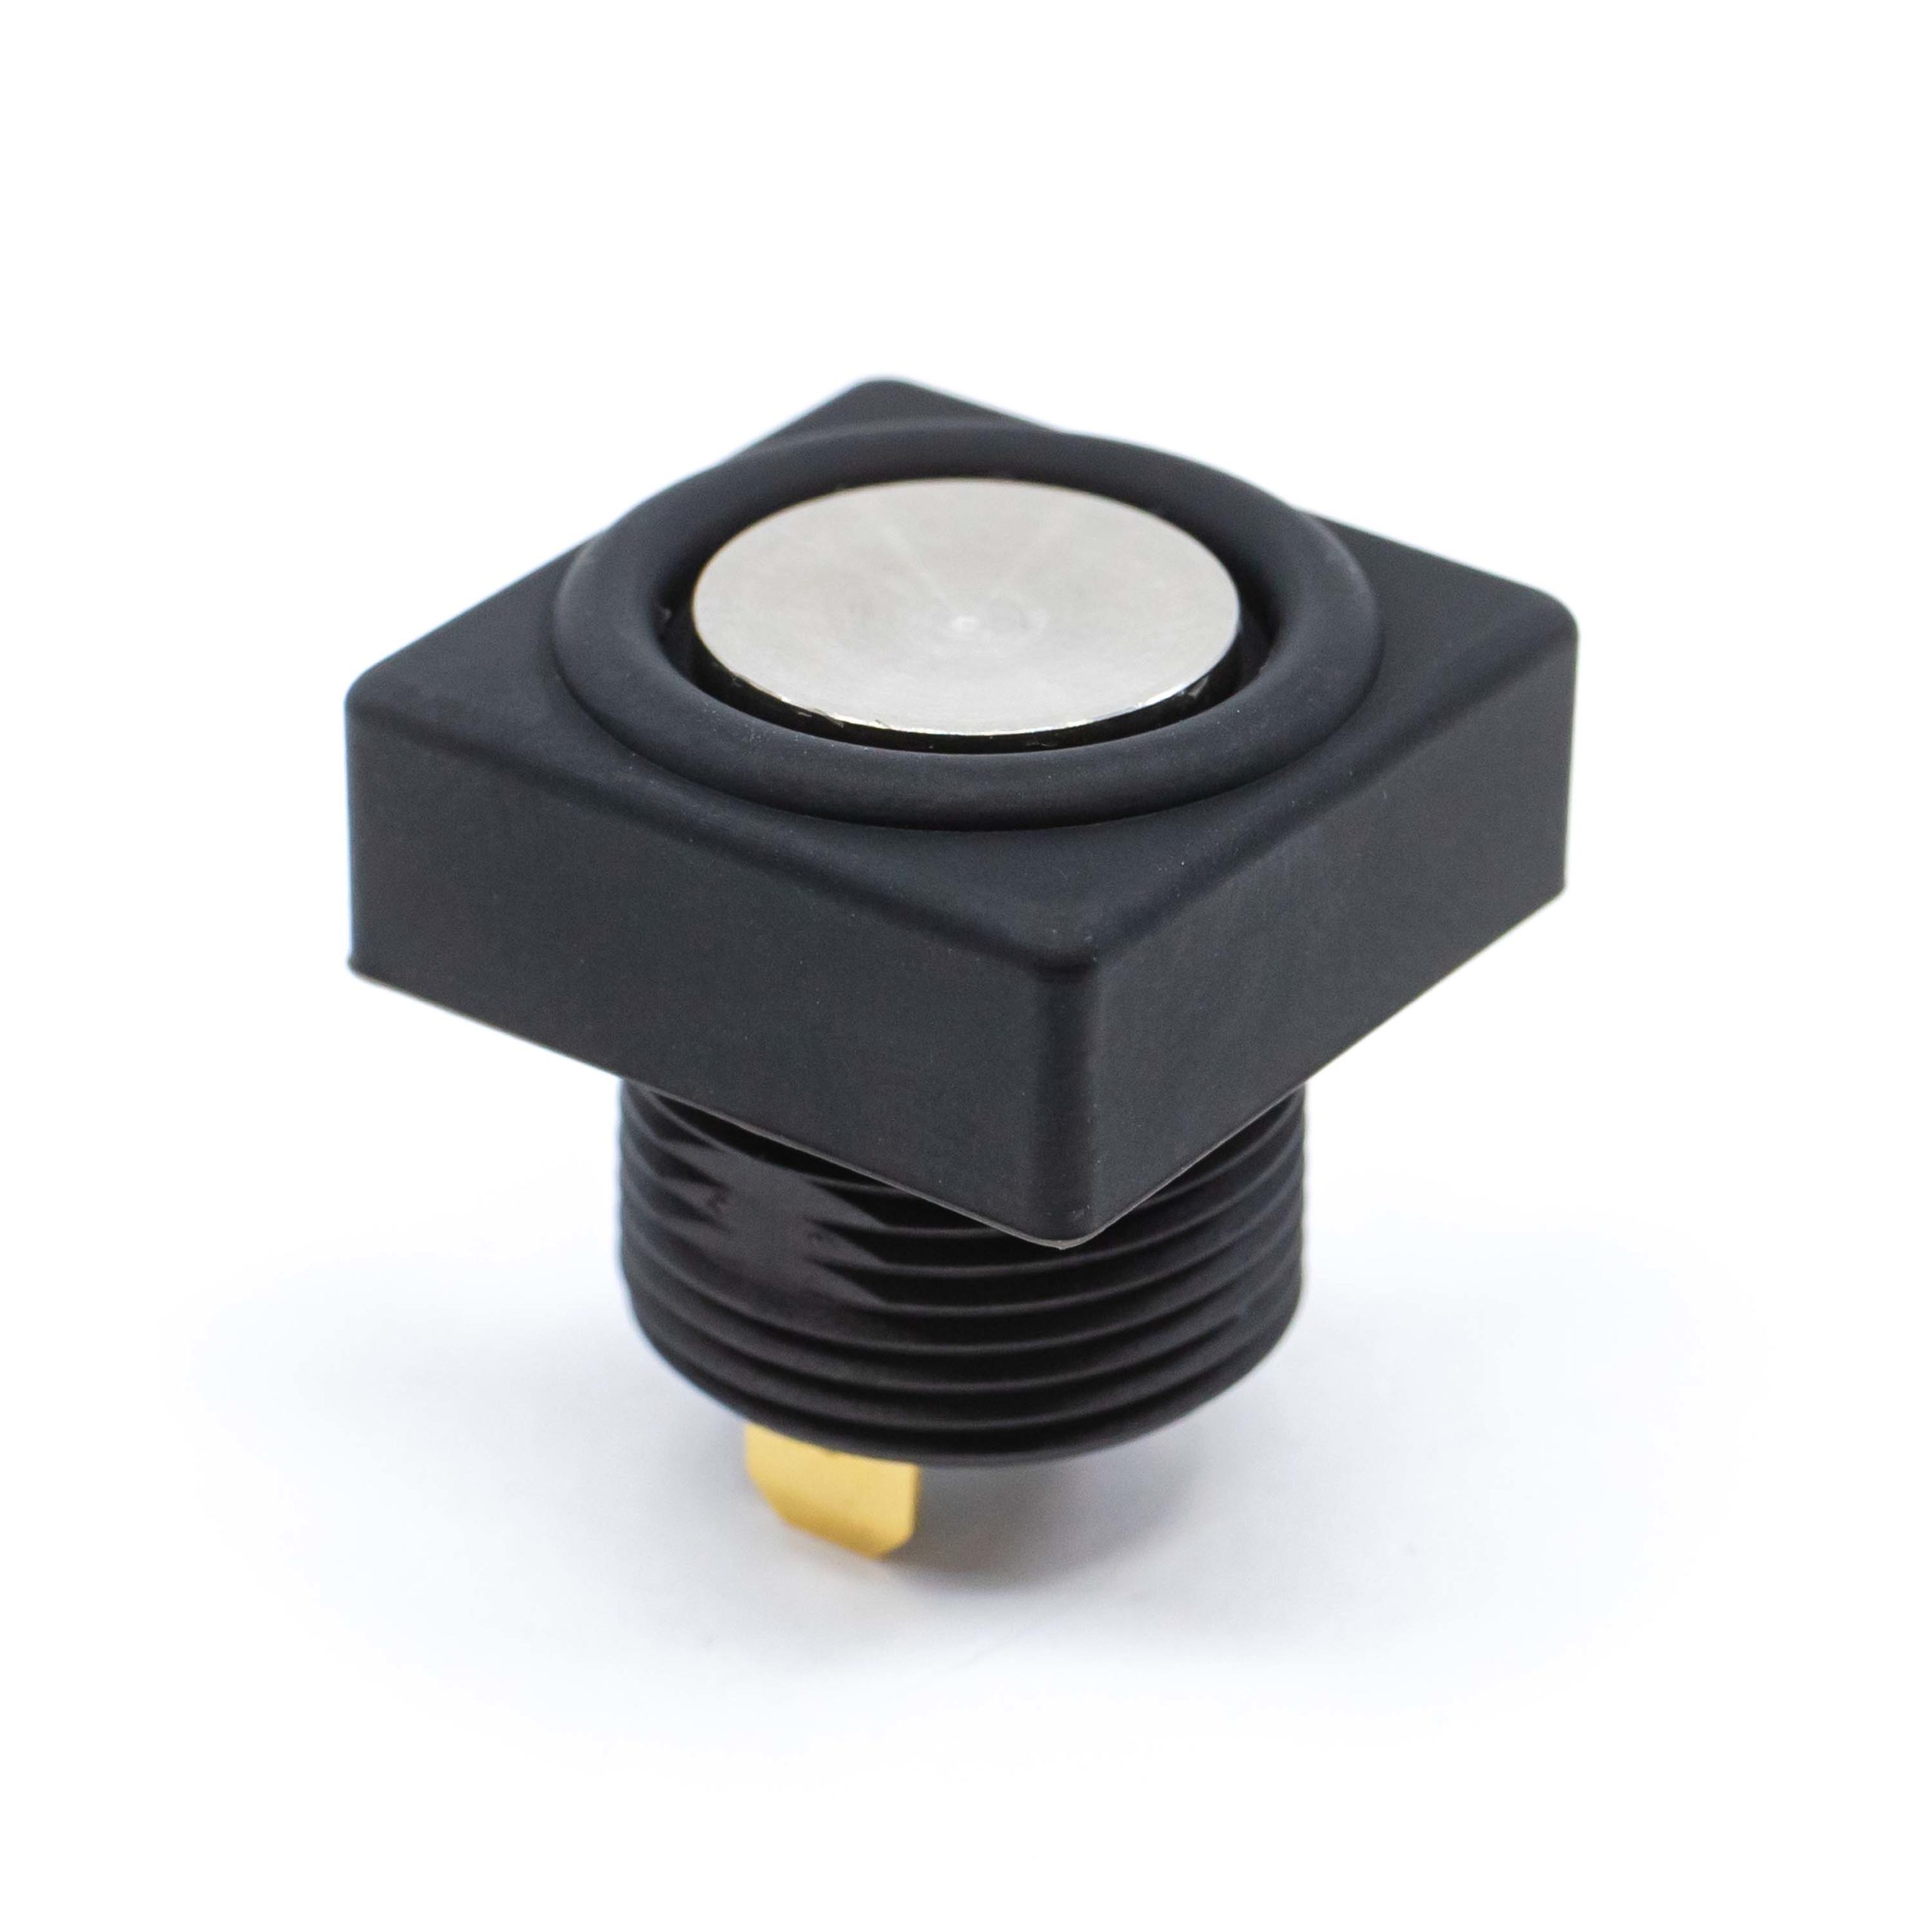 RP8600 sealed pushbutton switch